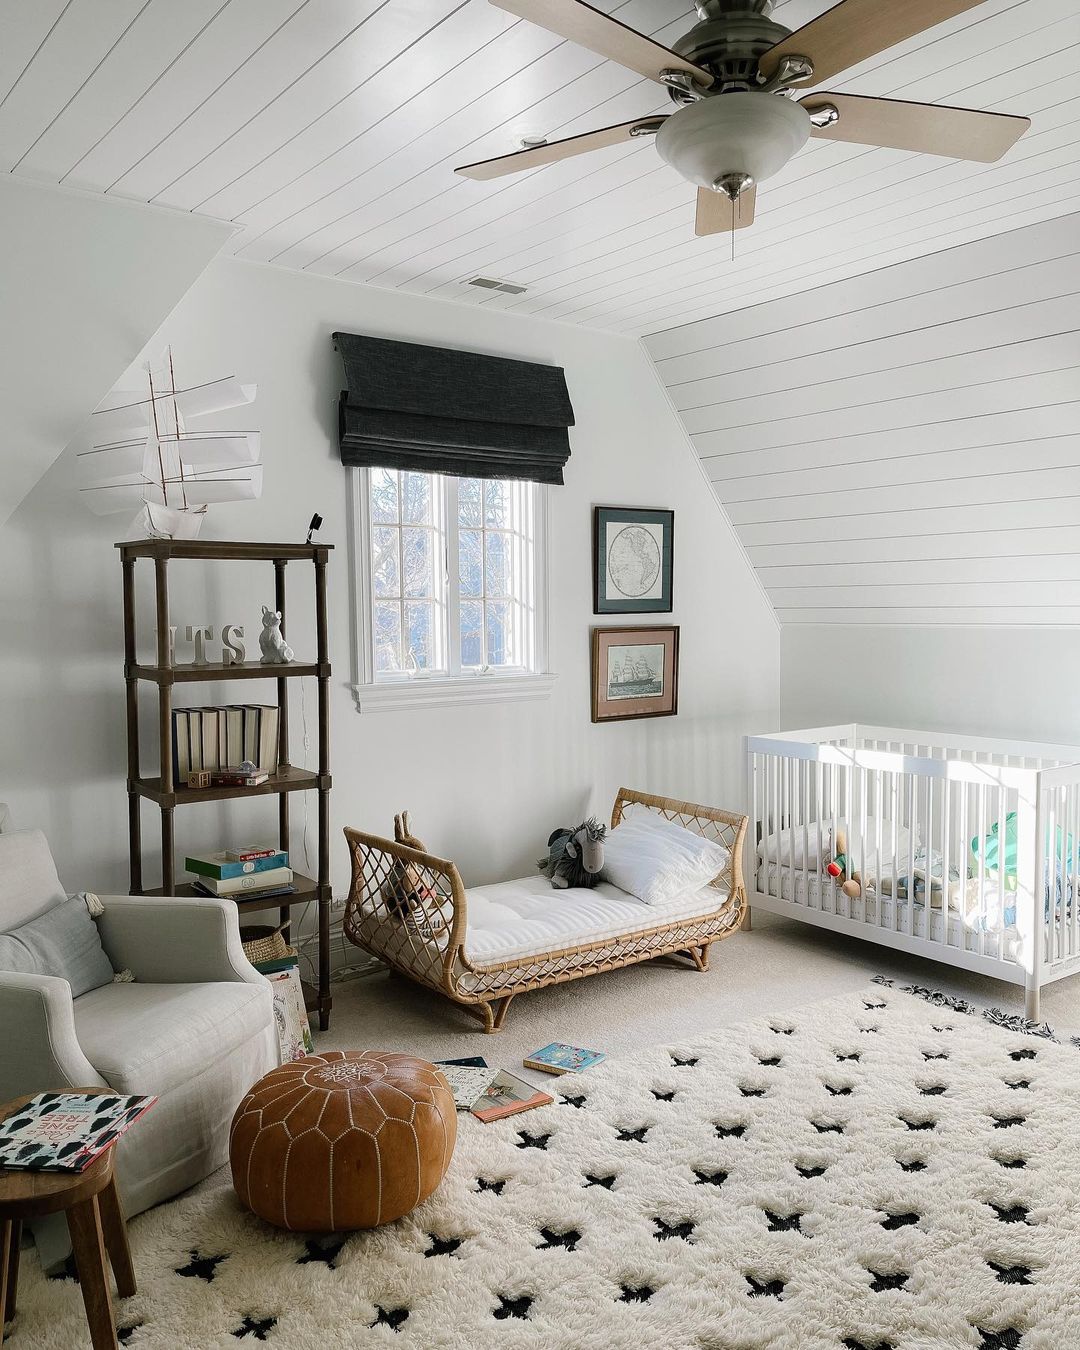 How to Babyproof Your Home